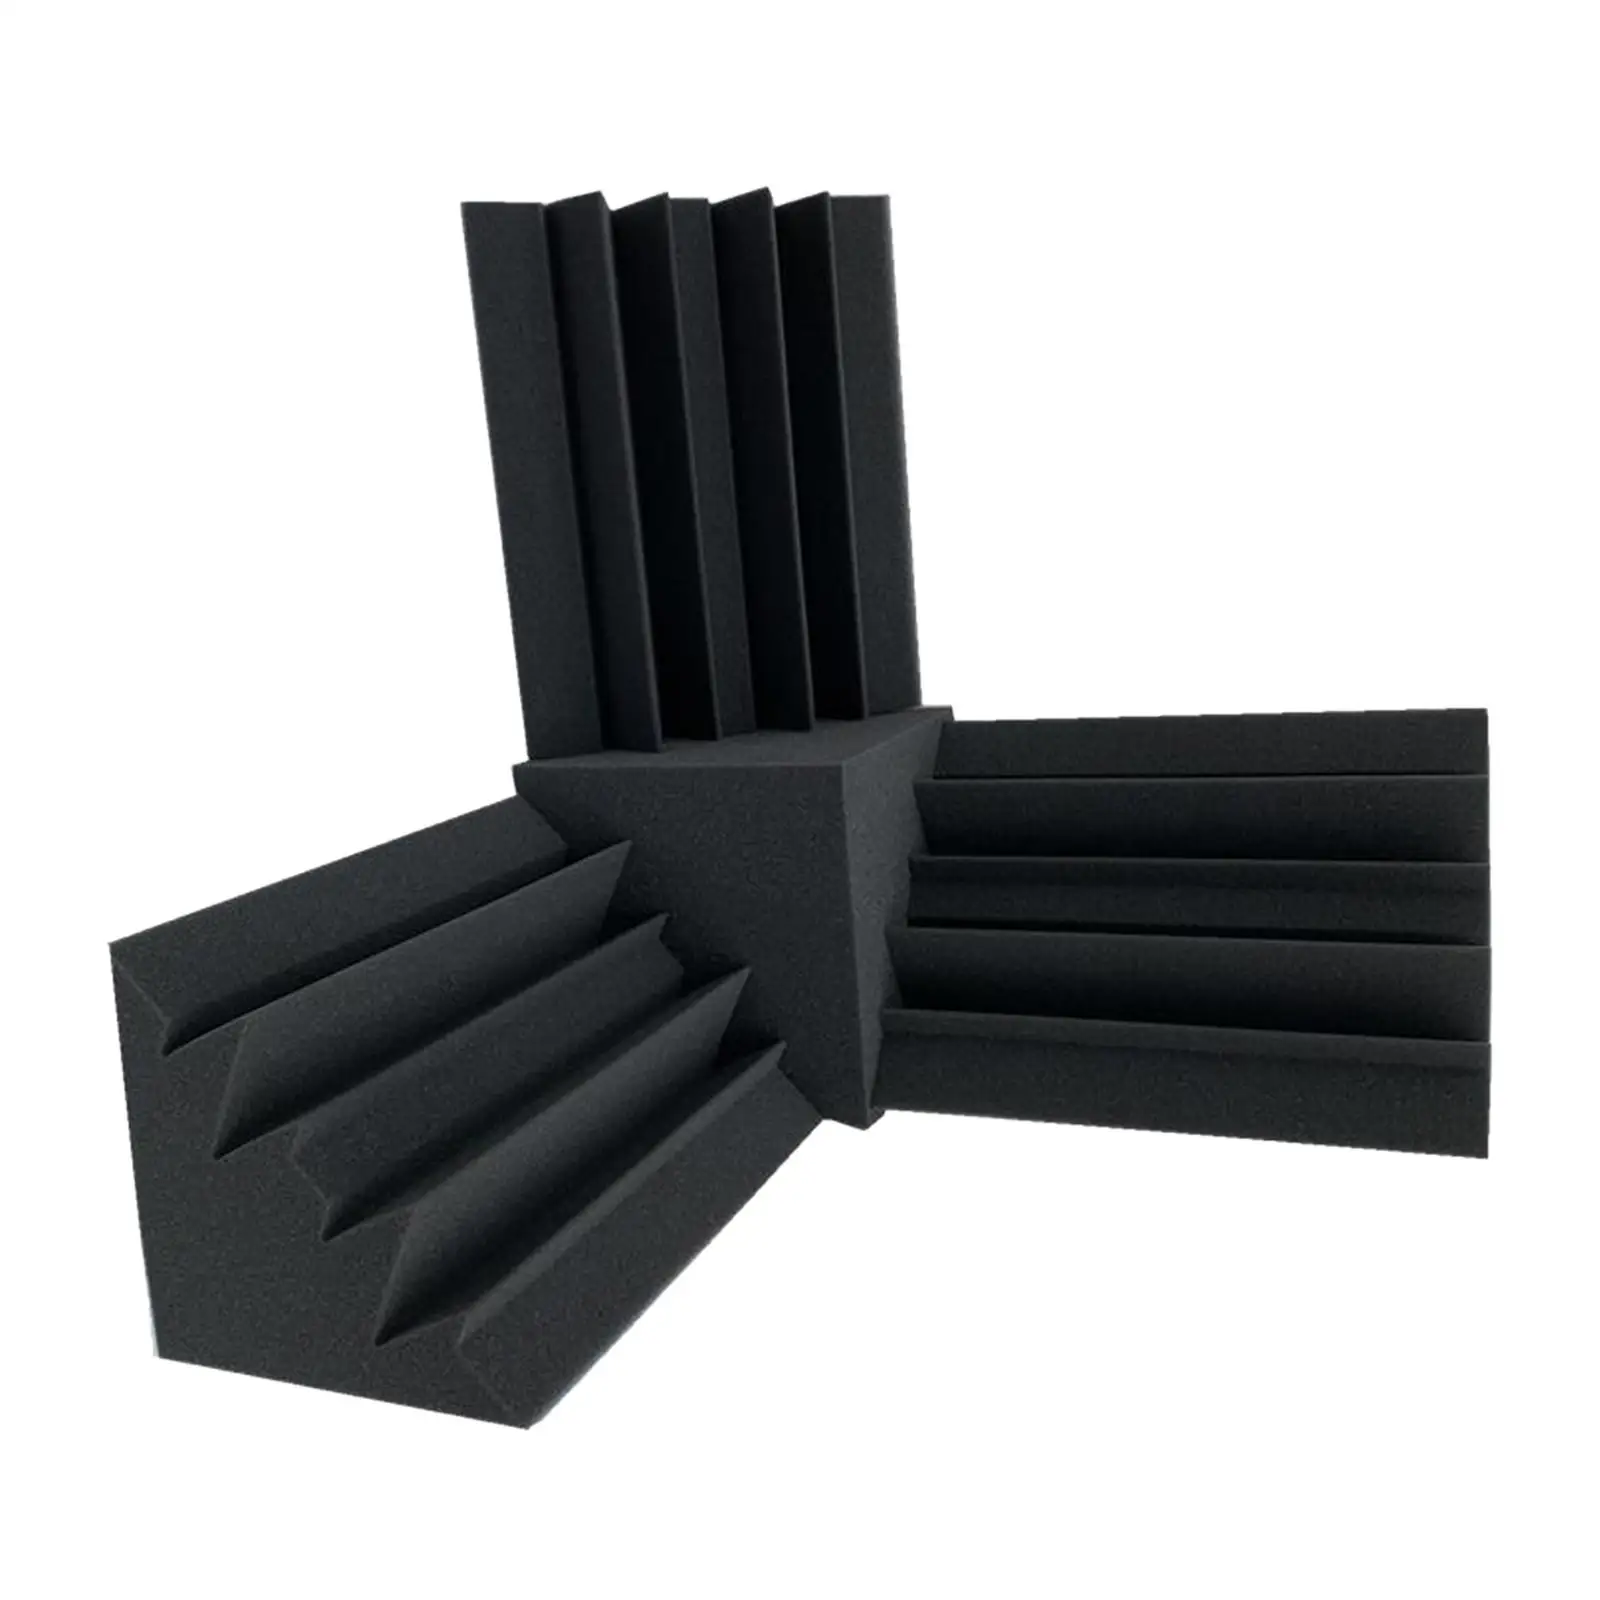 Set of Four acoustic Foam Panels Sound Proof Sound Insulation Easy to Install Corner Wedge Foam Sound Absorbing Panel for Studio